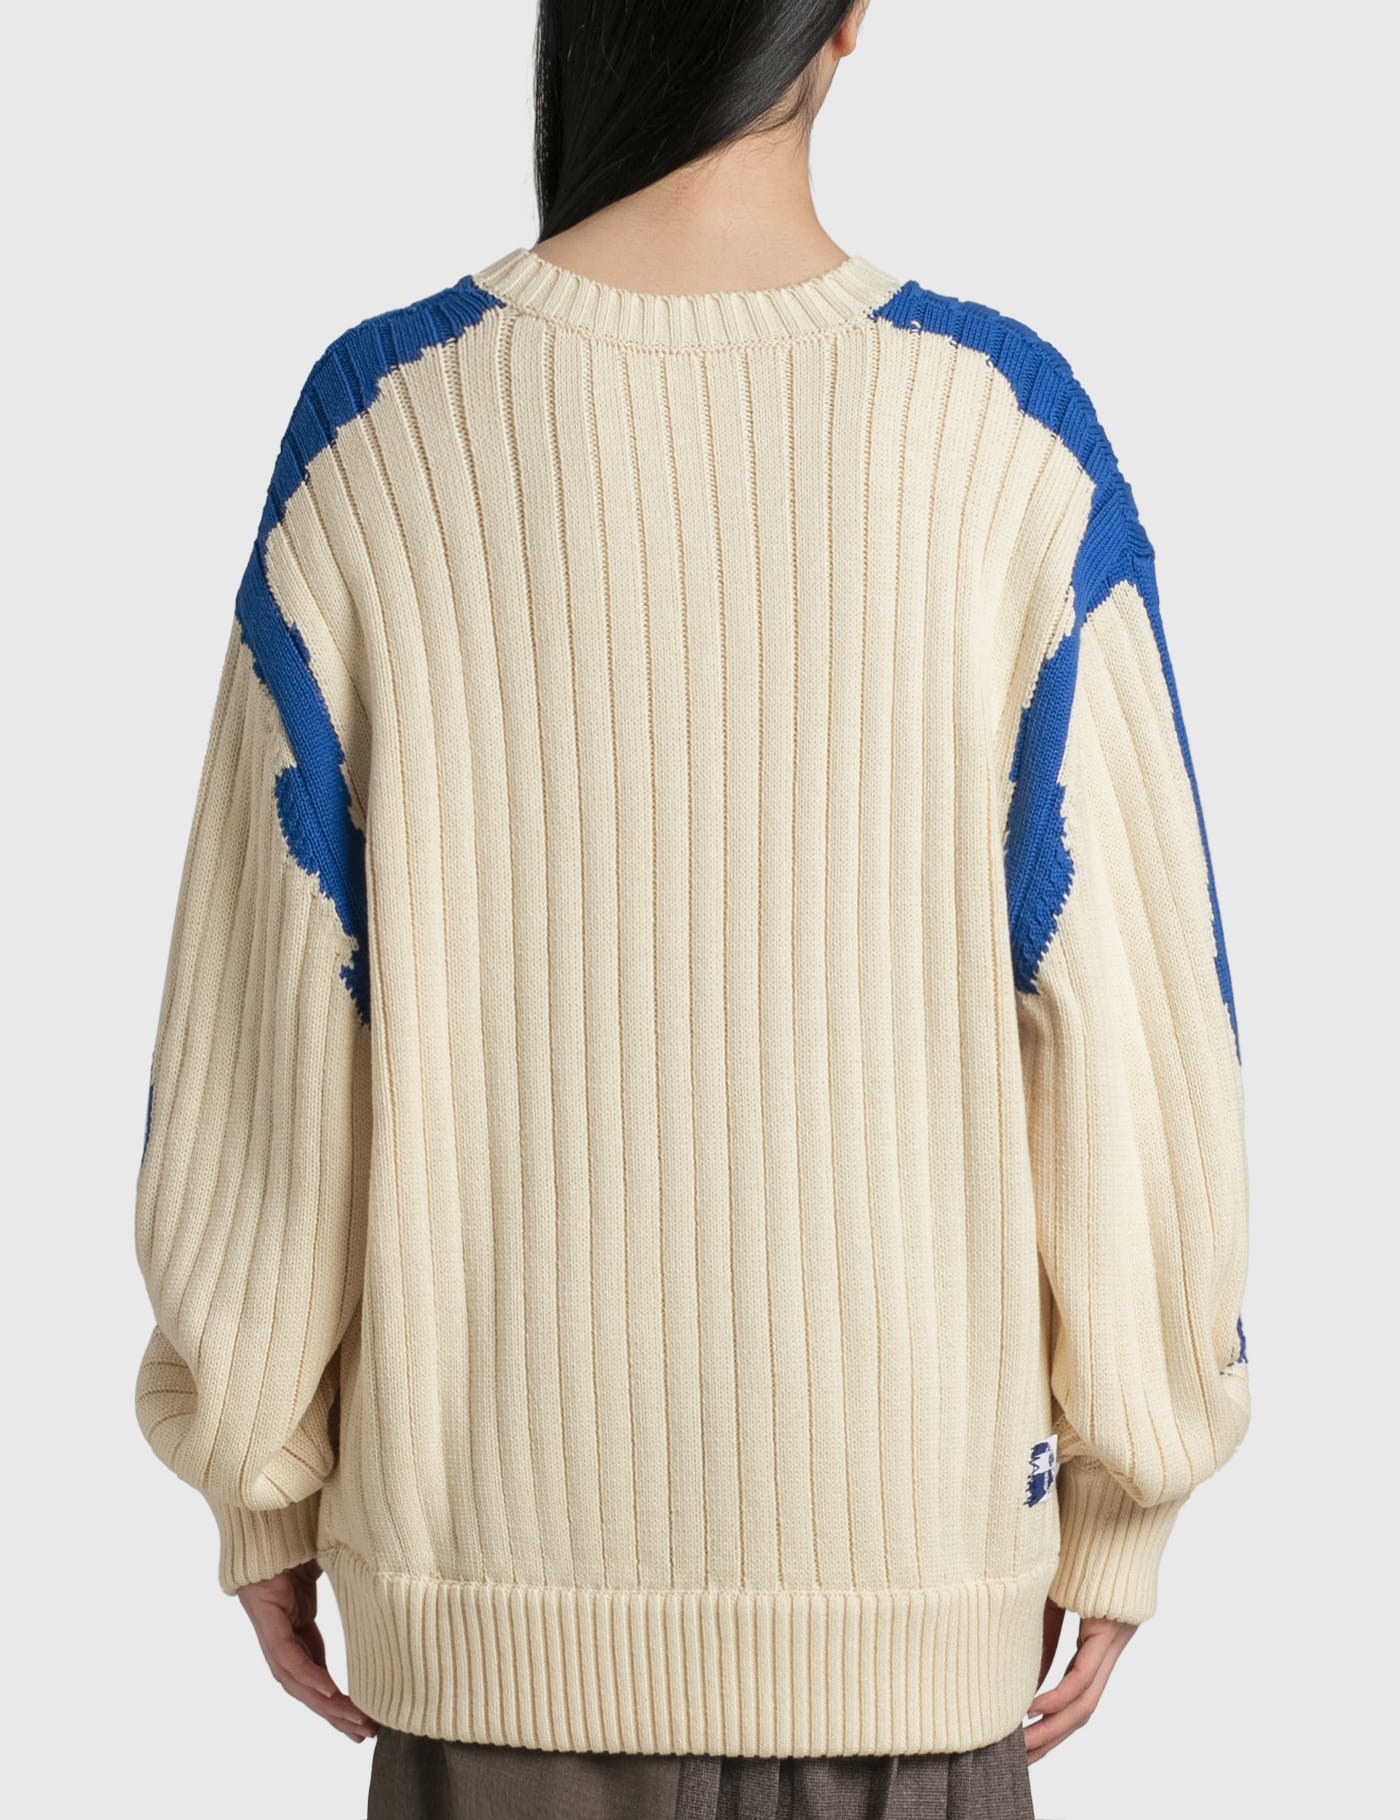 Ader Error - Benny Knit | HBX - Globally Curated Fashion and 